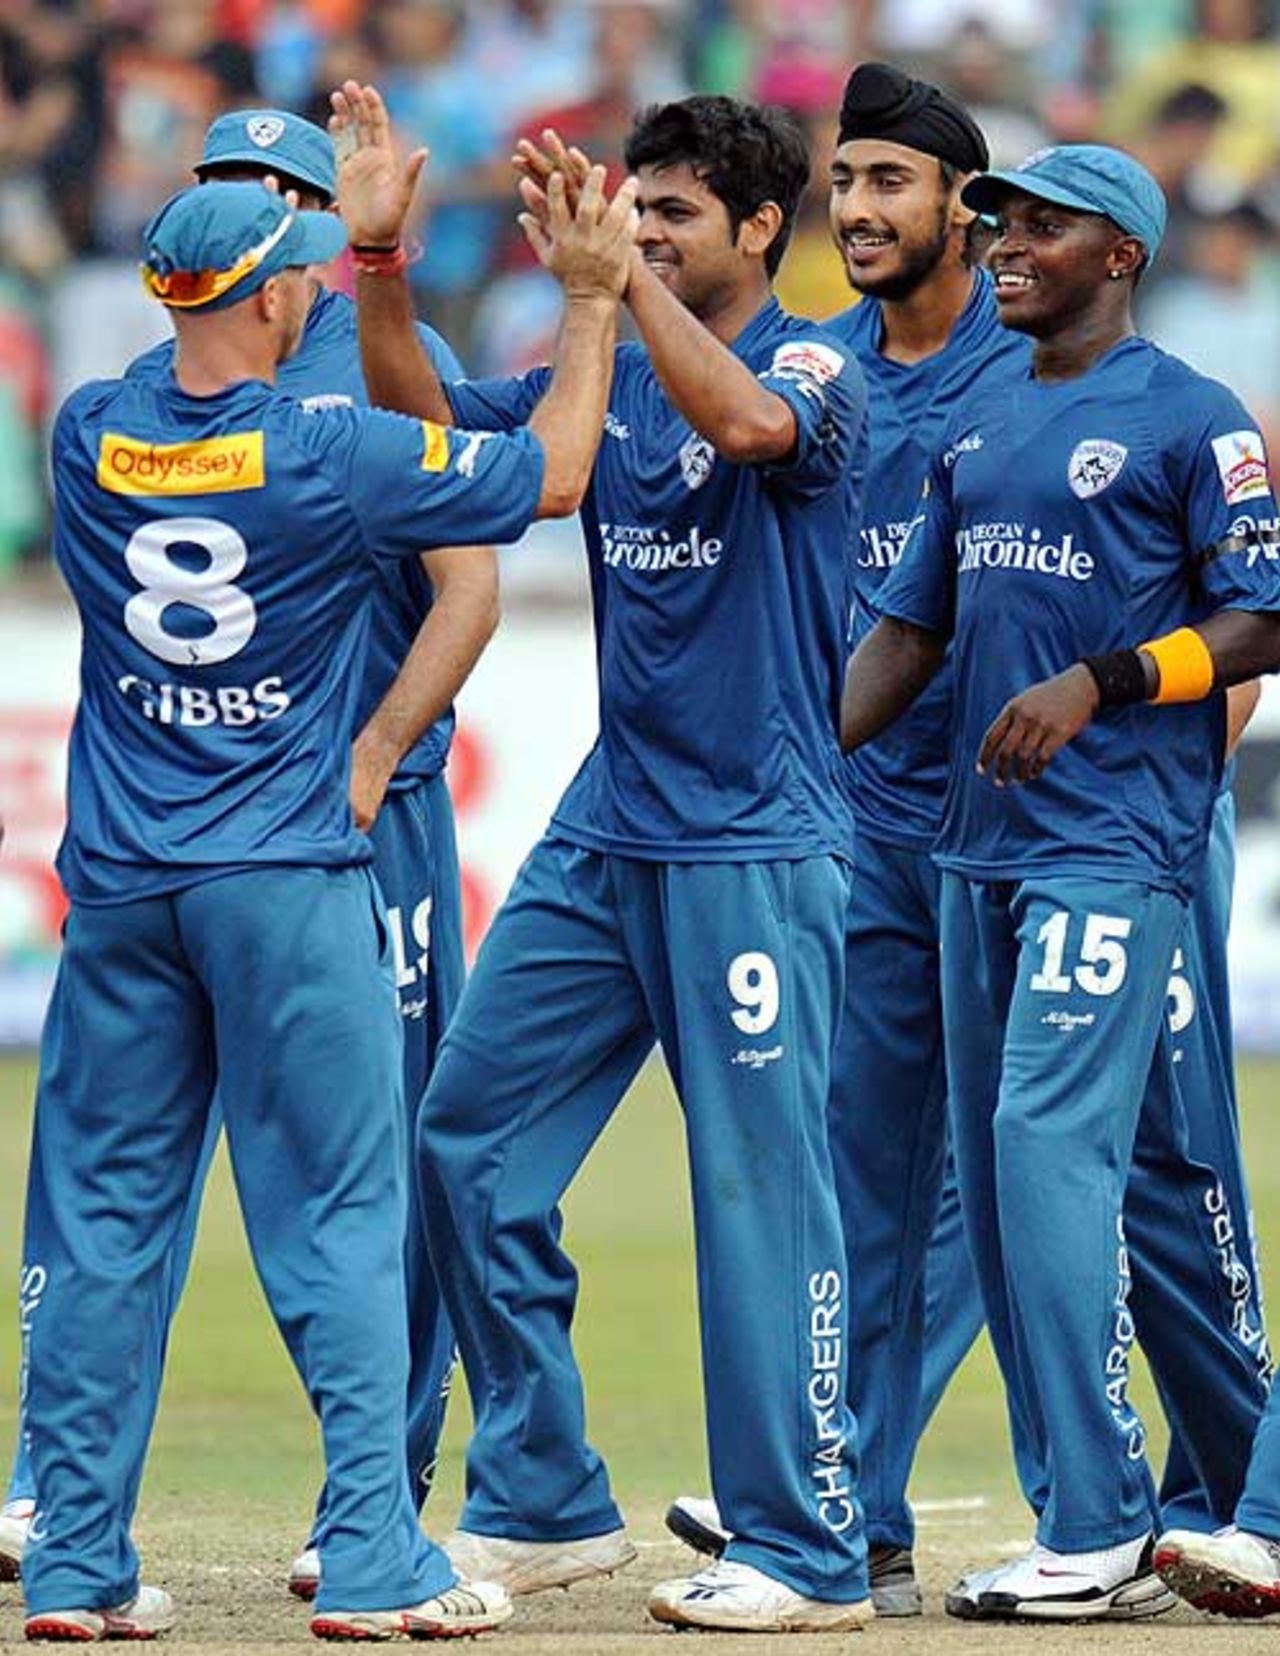 RP Singh bowled a crucial last over as Deccan Chargers won, Deccan Chargers v Mumbai Indians, IPL, 12th Match, Durban, April 25, 2009